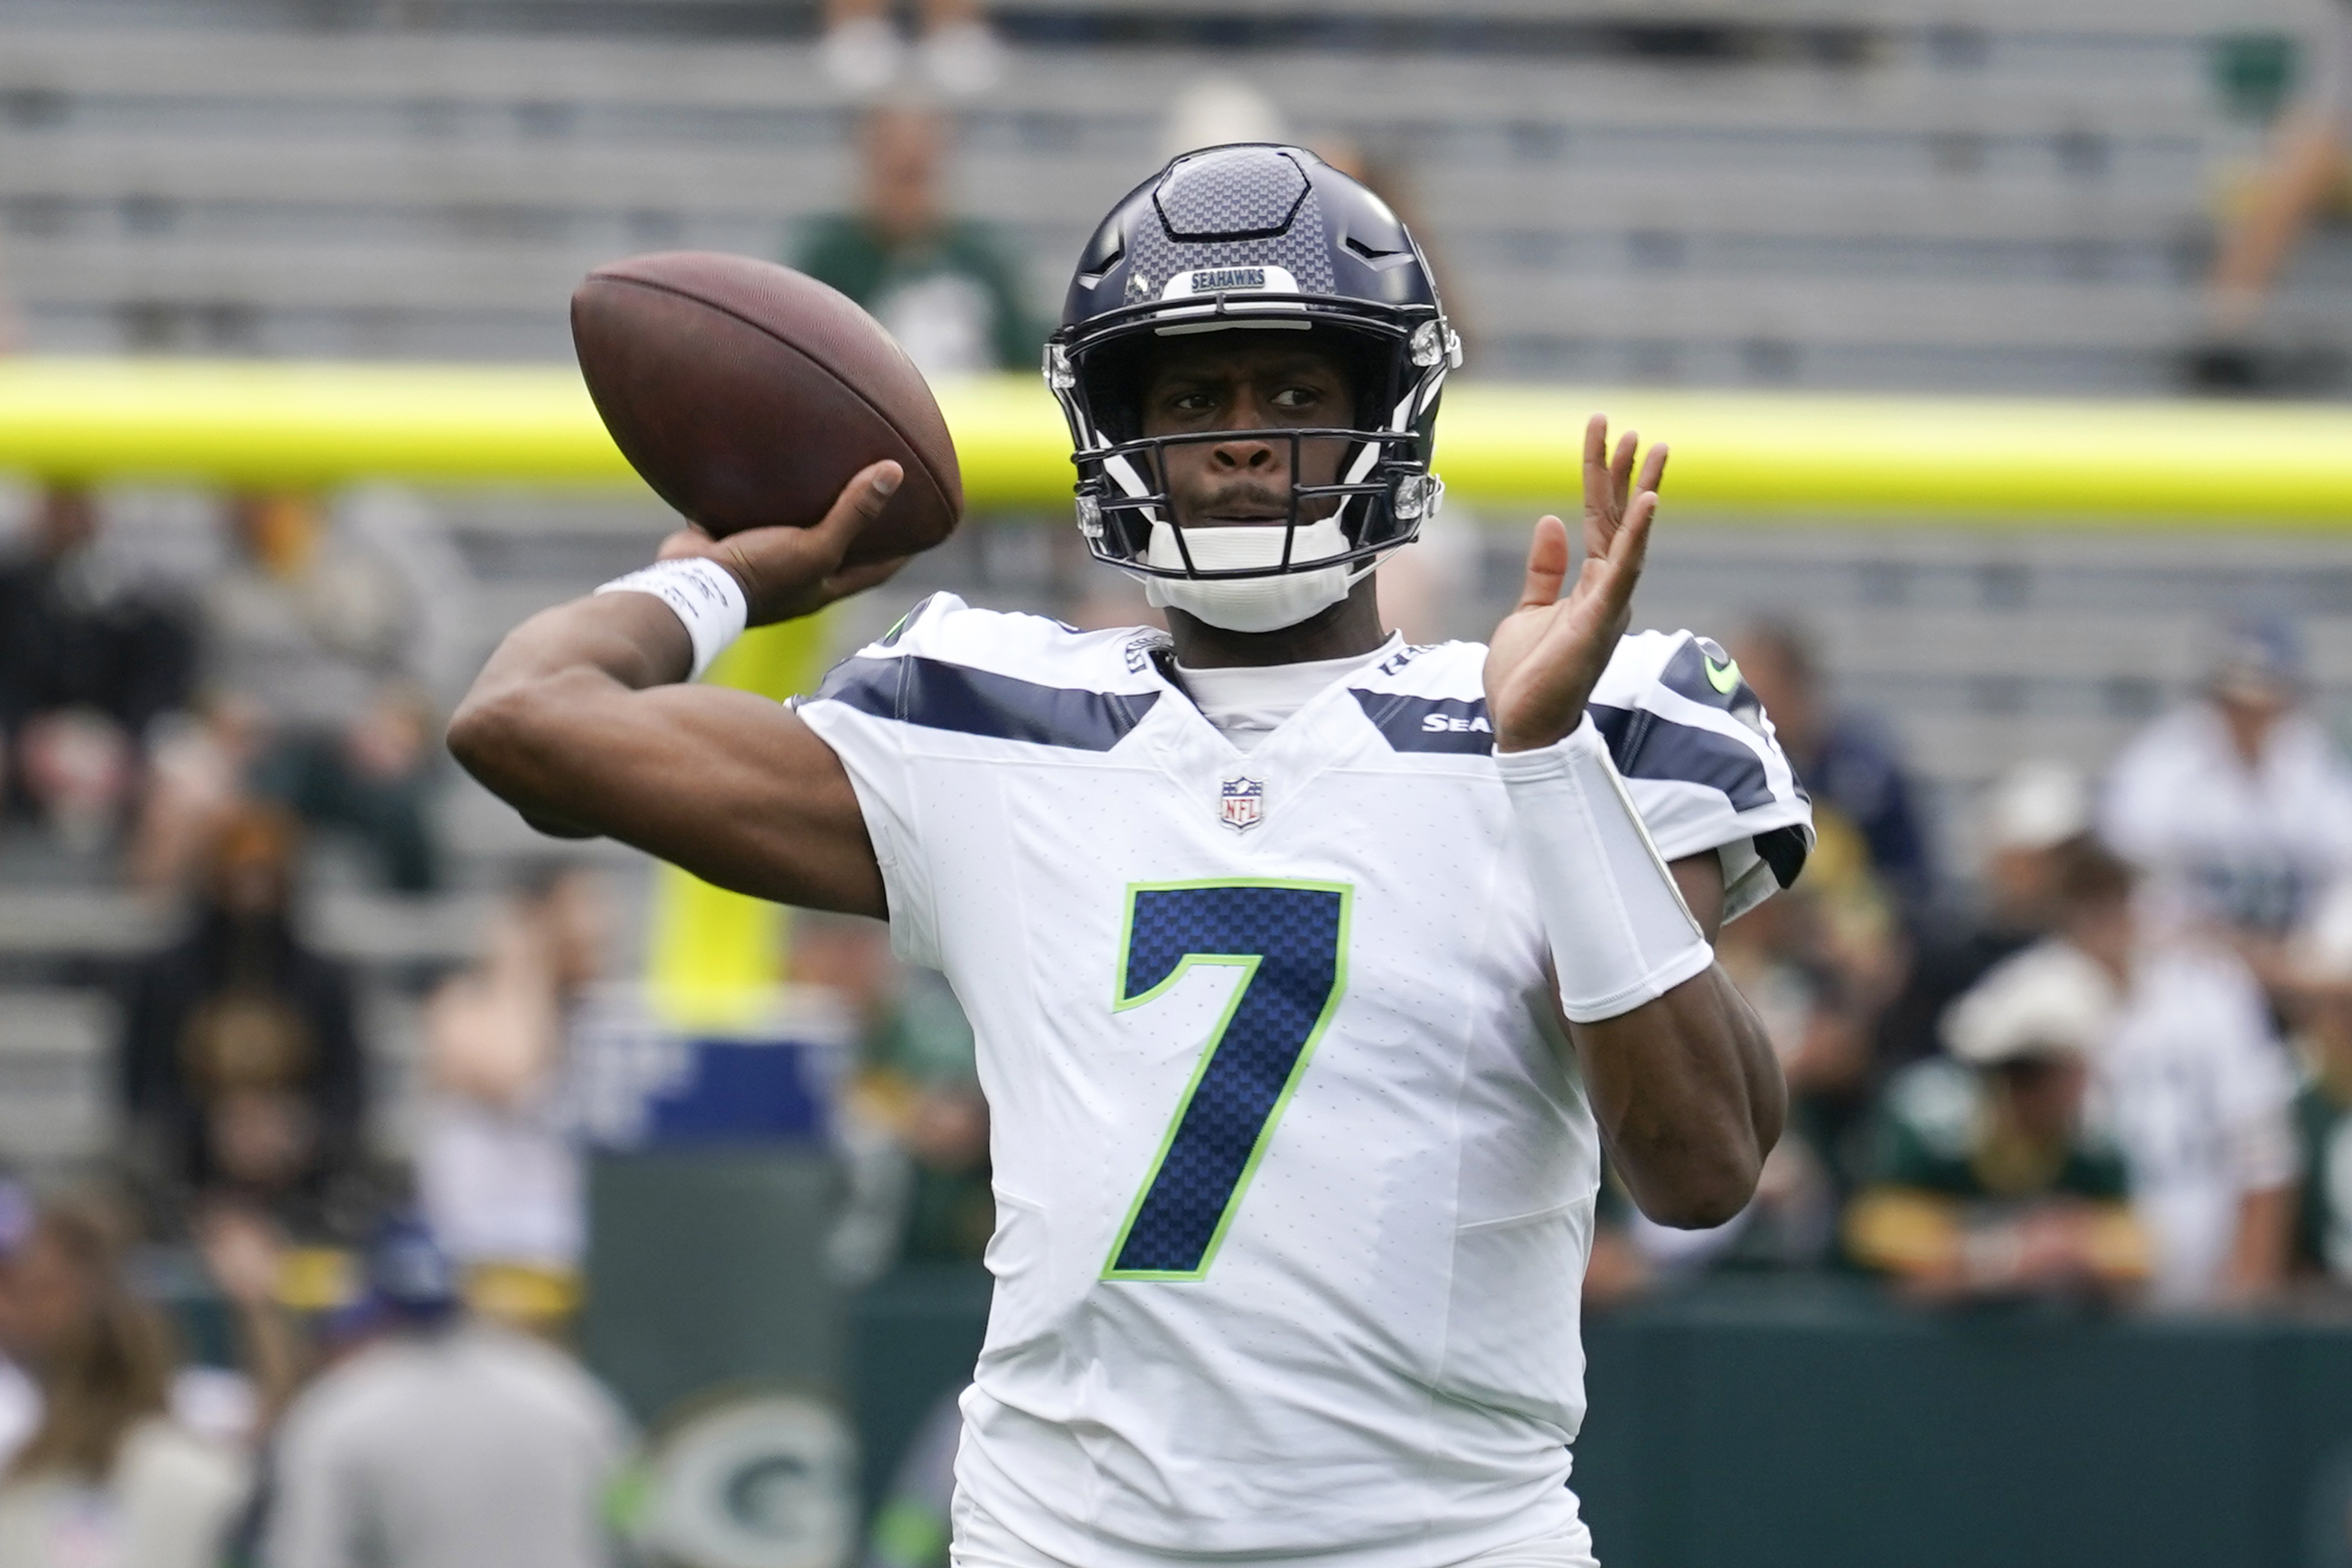 2021 Rams vs Seahawks Props - Best Team and Player Prop Bets